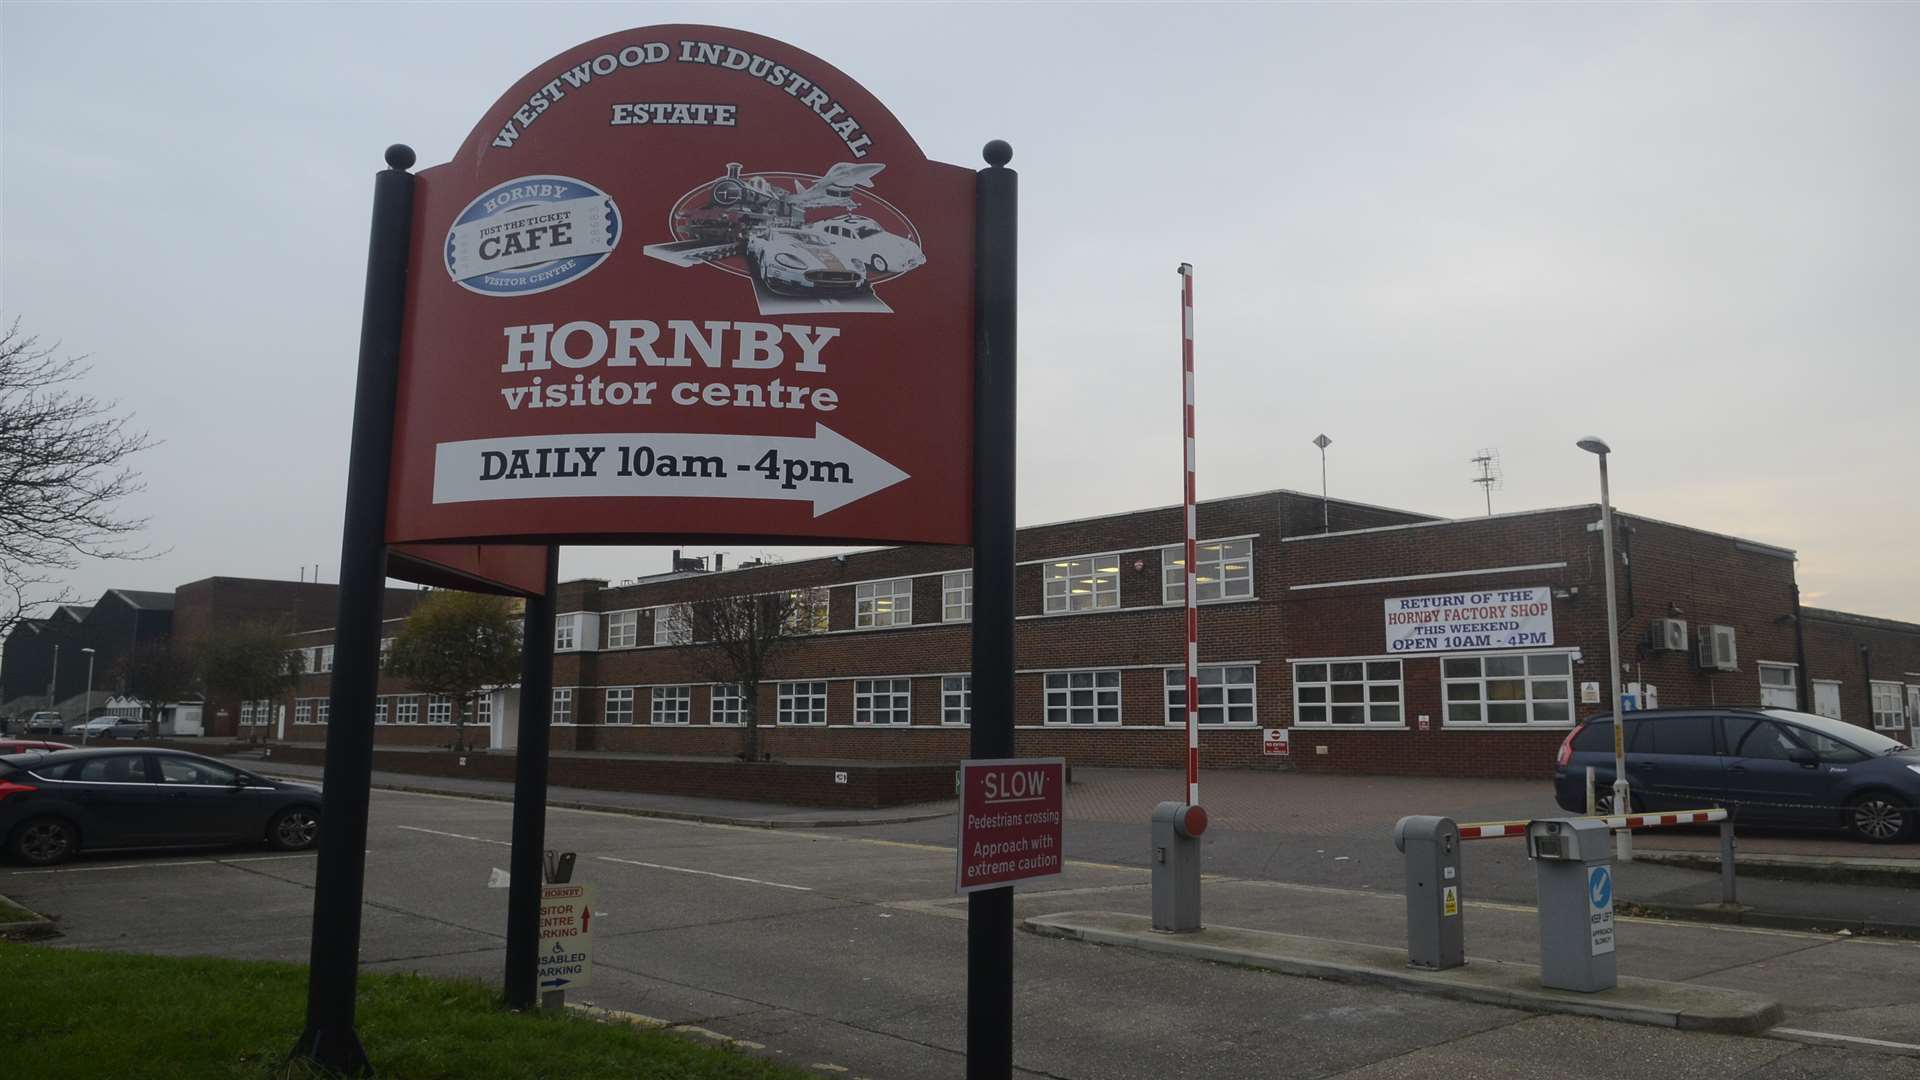 The Hornby visitor centre in Margate has been in the town for 60 years